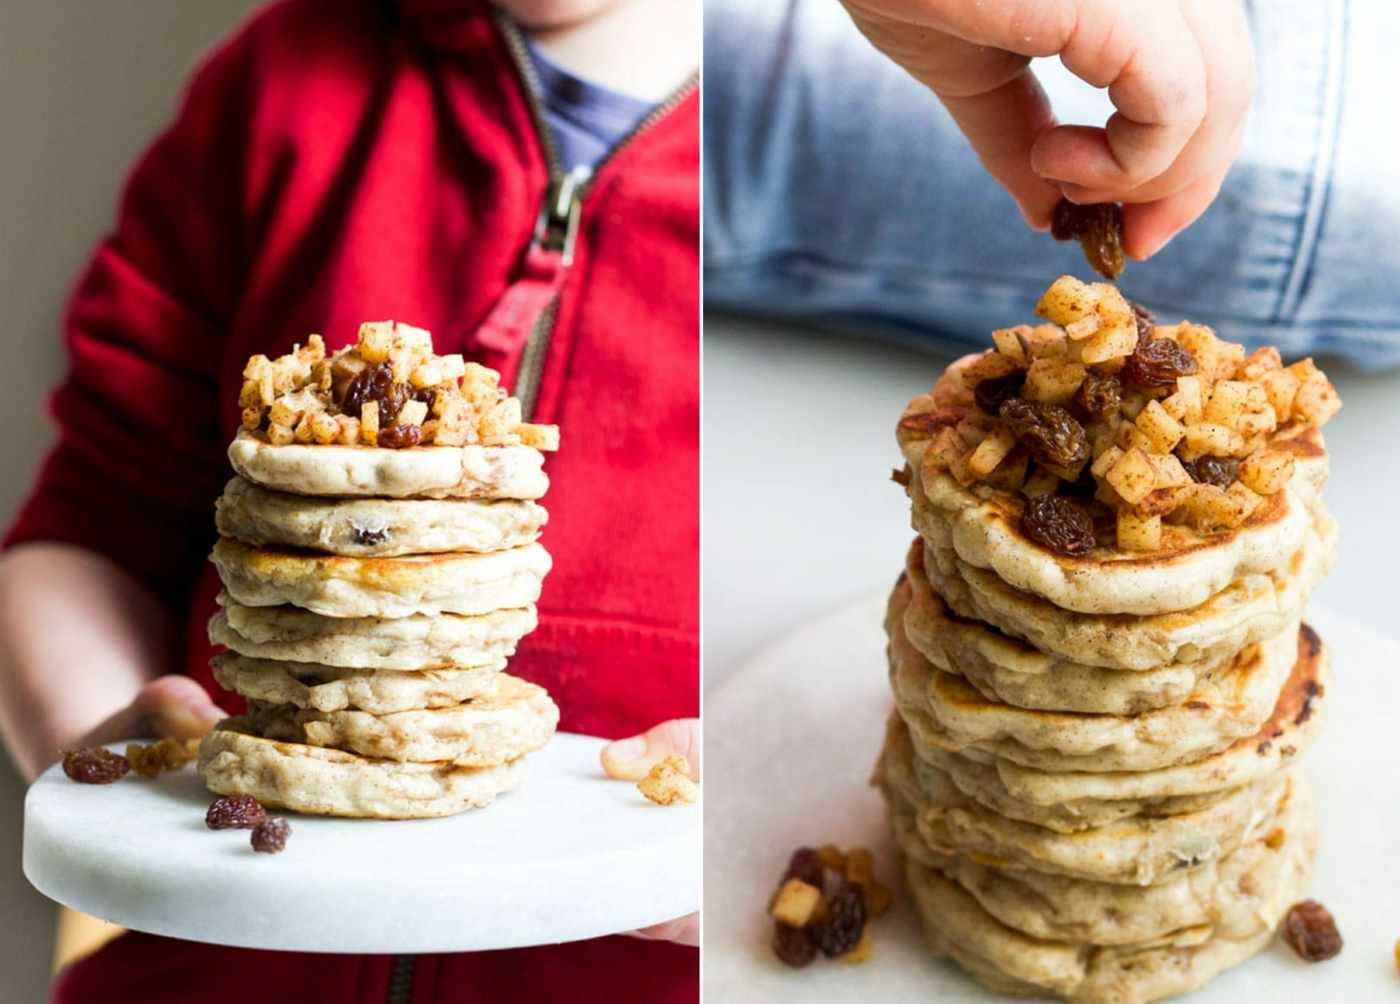 Apple pancakes with cinnamon and raisins as healthy snacks for the school